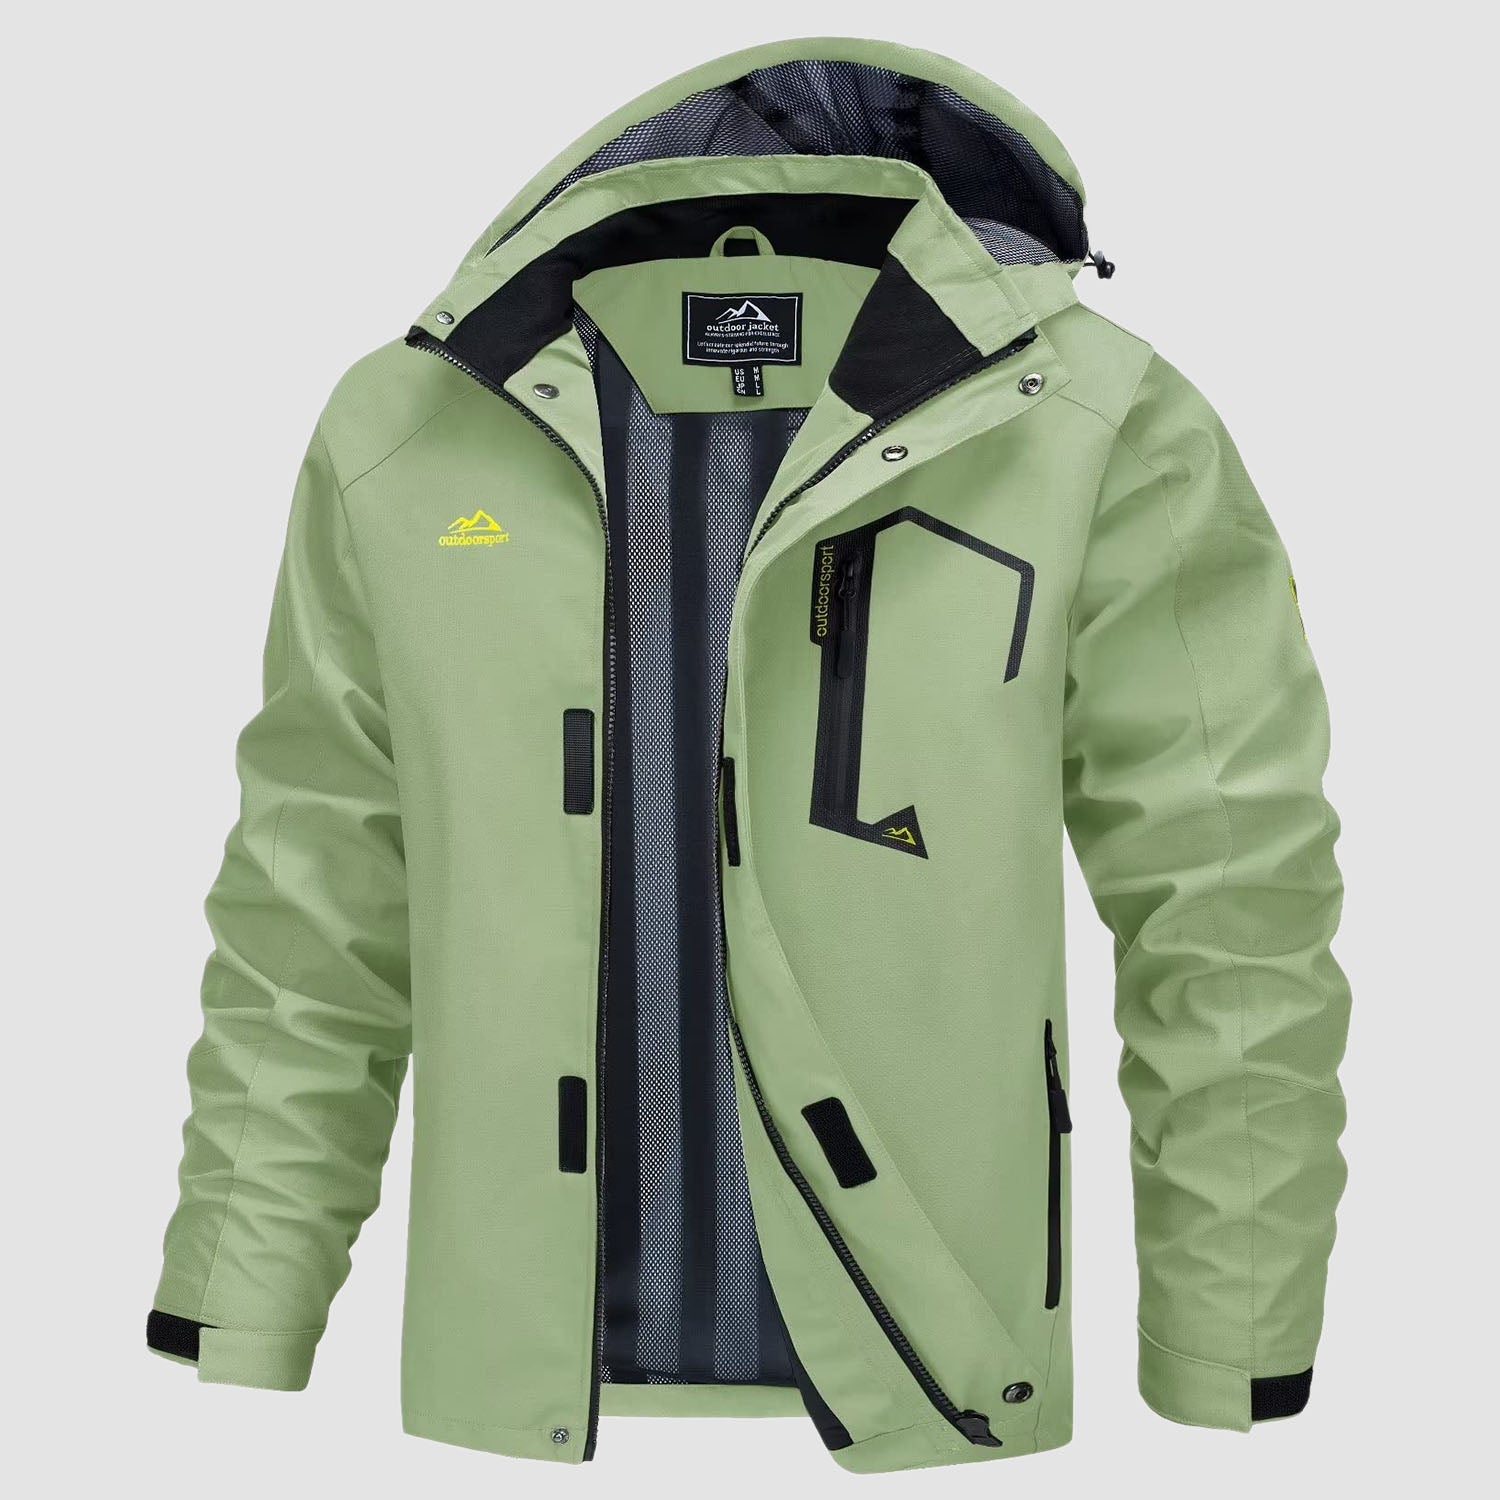 https://magcomsen.com/cdn/shop/products/Men_s-Hooded-Water-Resistant-Rain-Jacket-Windbreaker-with-Multi-Pockets-for-Hiking-Fishing-Runing_2_1.jpg?v=1669280467&width=1500